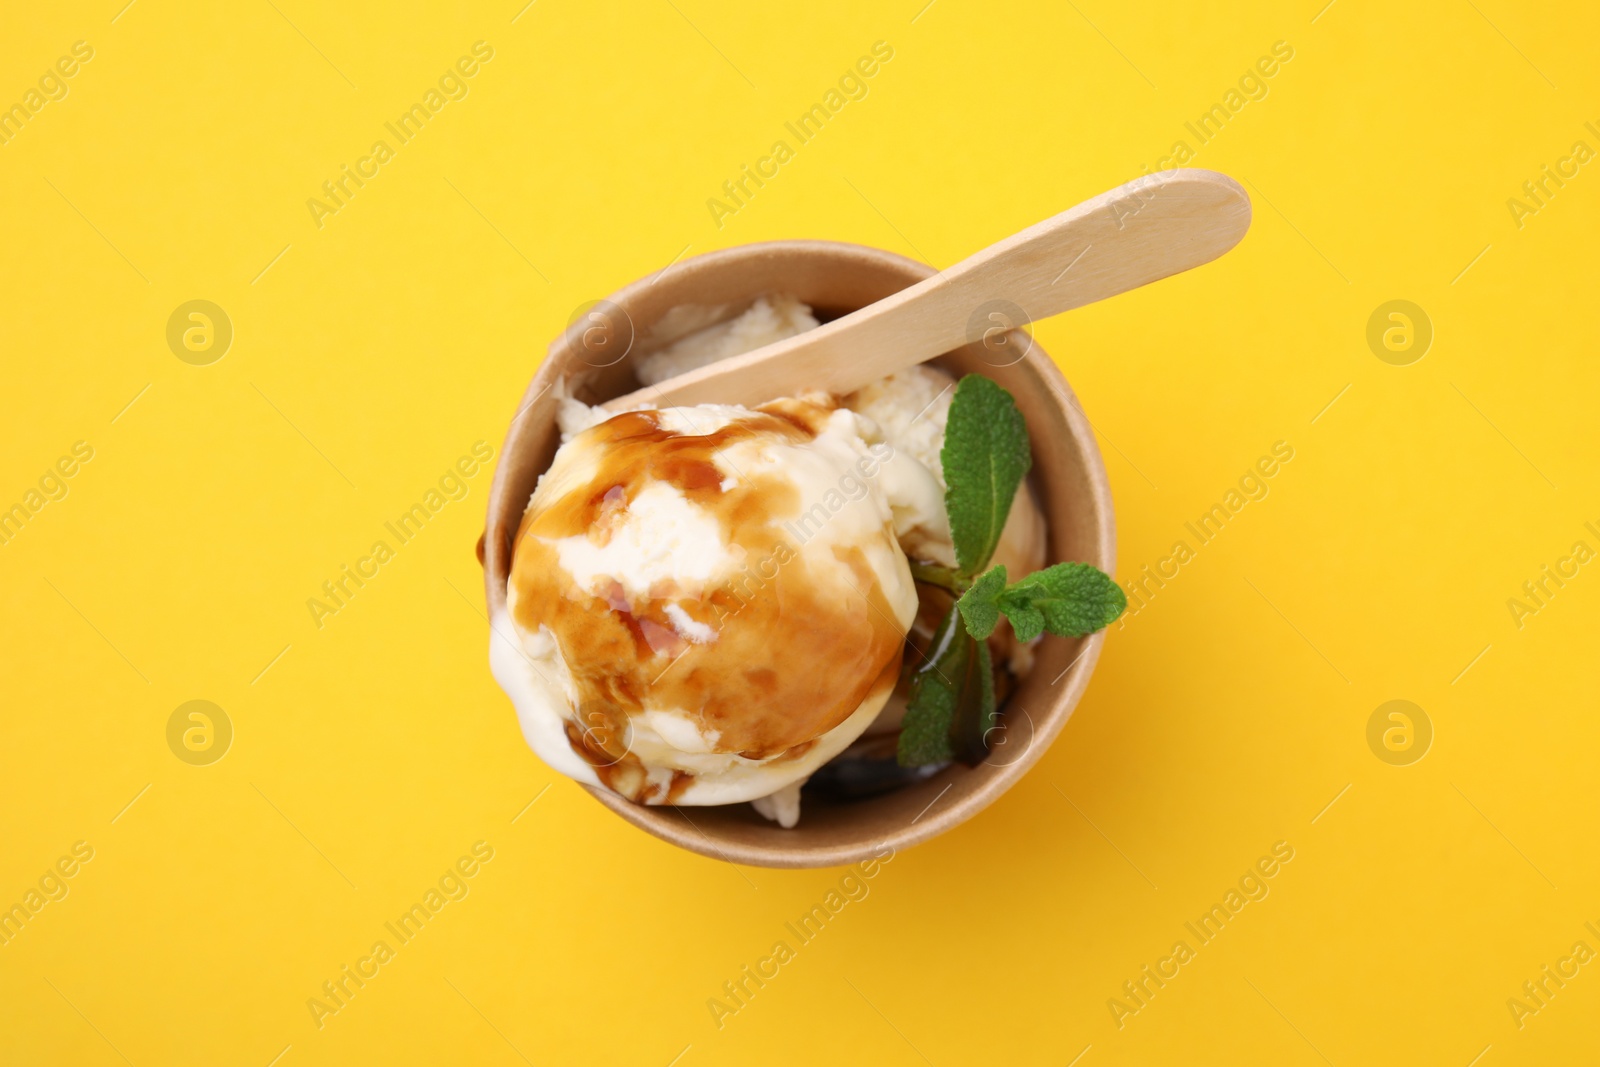 Photo of Scoops of ice cream with caramel sauce and mint leaves on yellow table, top view